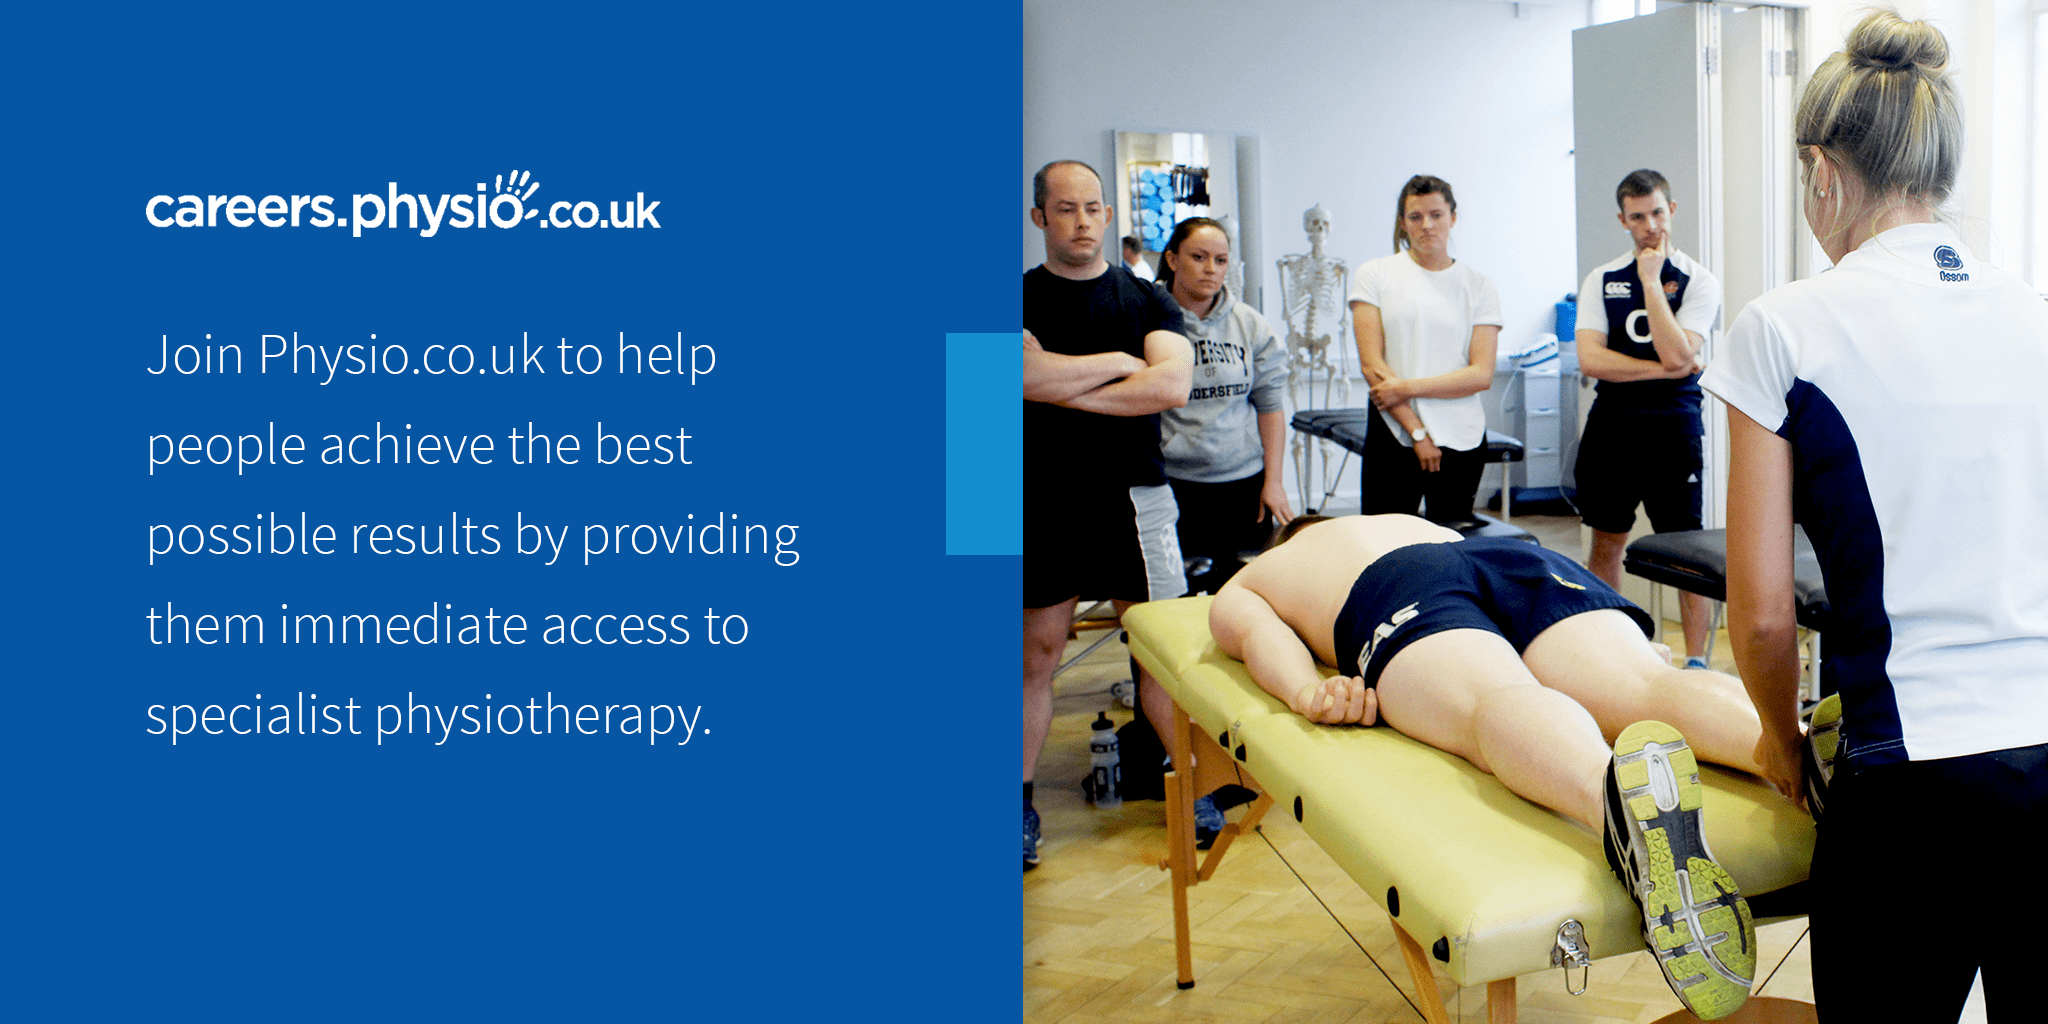 Visit careers.physio.co.uk to apply